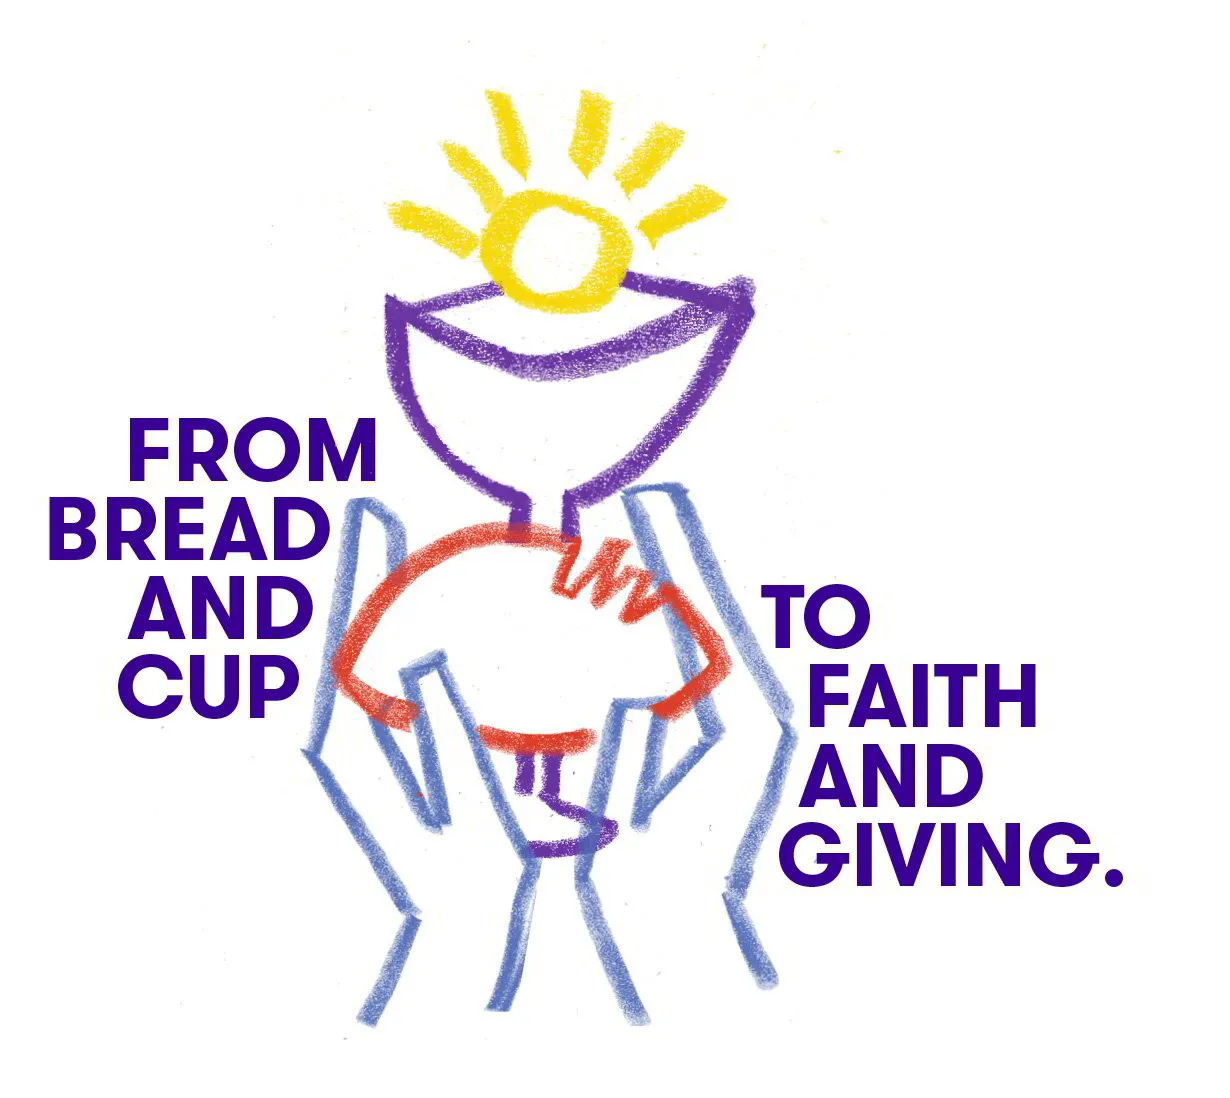 Bread and Cup logo from UCC